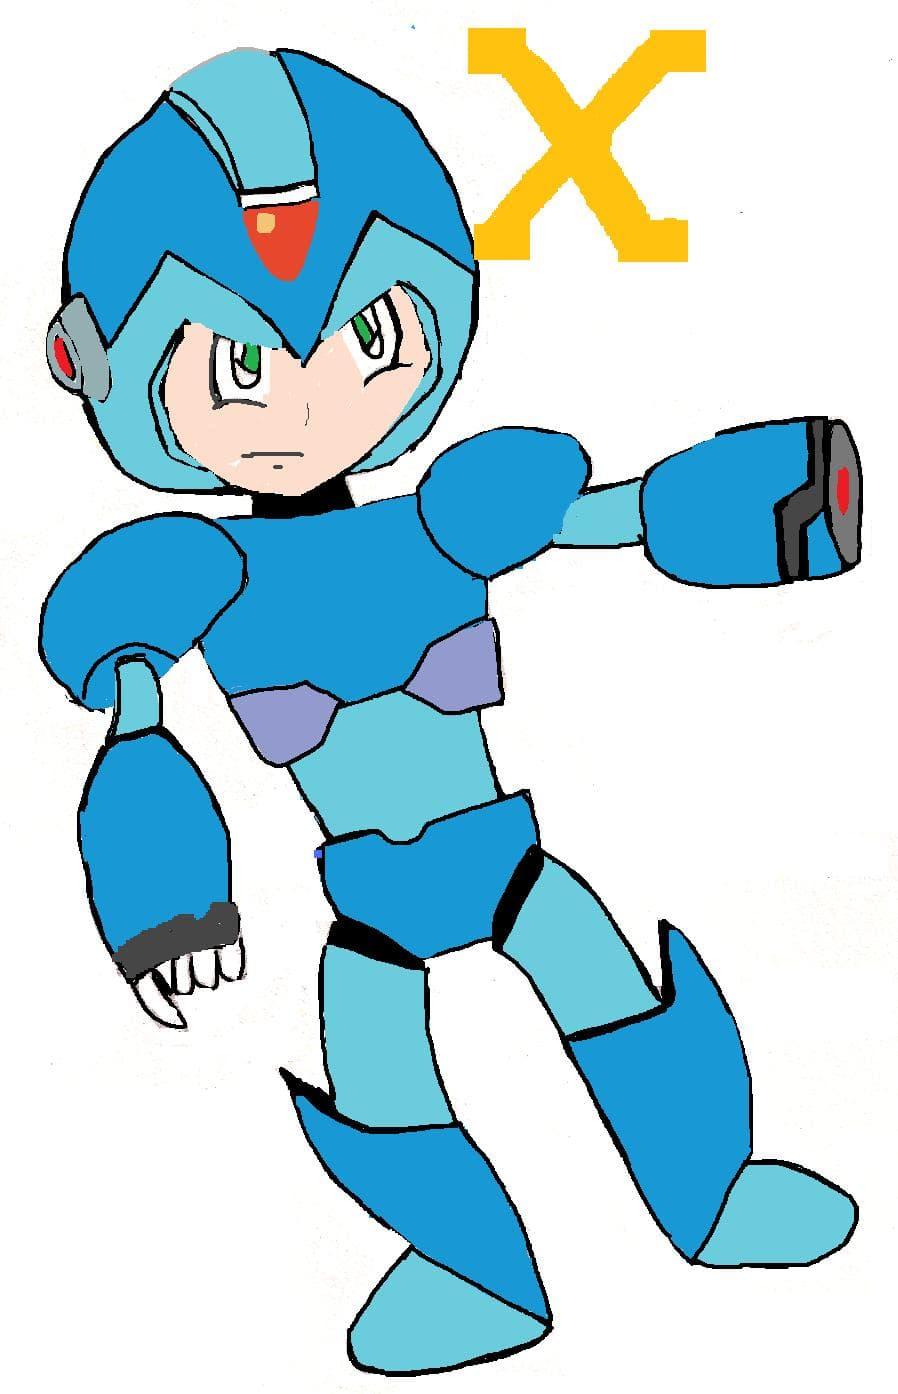 A crude digital drawing of MegaMan X, a blue android making a dynamic pose with an extended blaster arm